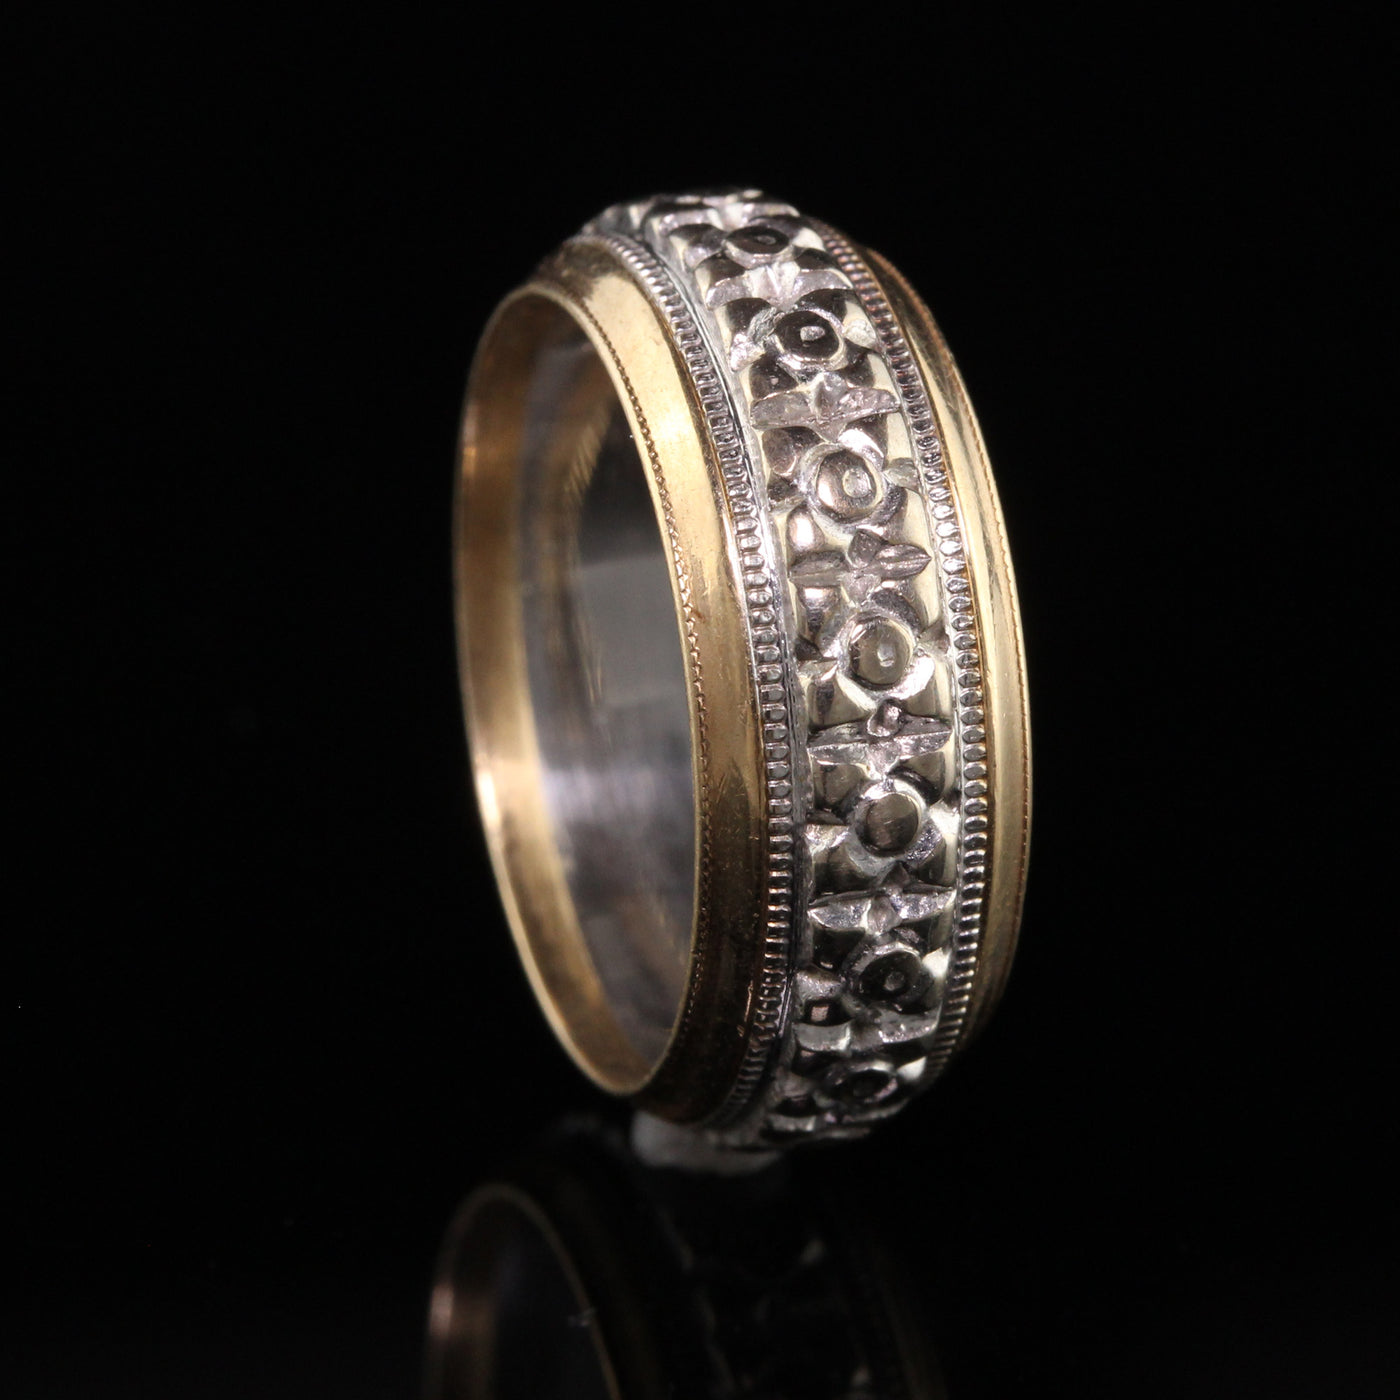 Antique Art Deco 14K Yellow and White Gold Engraved Blossom Wedding Band